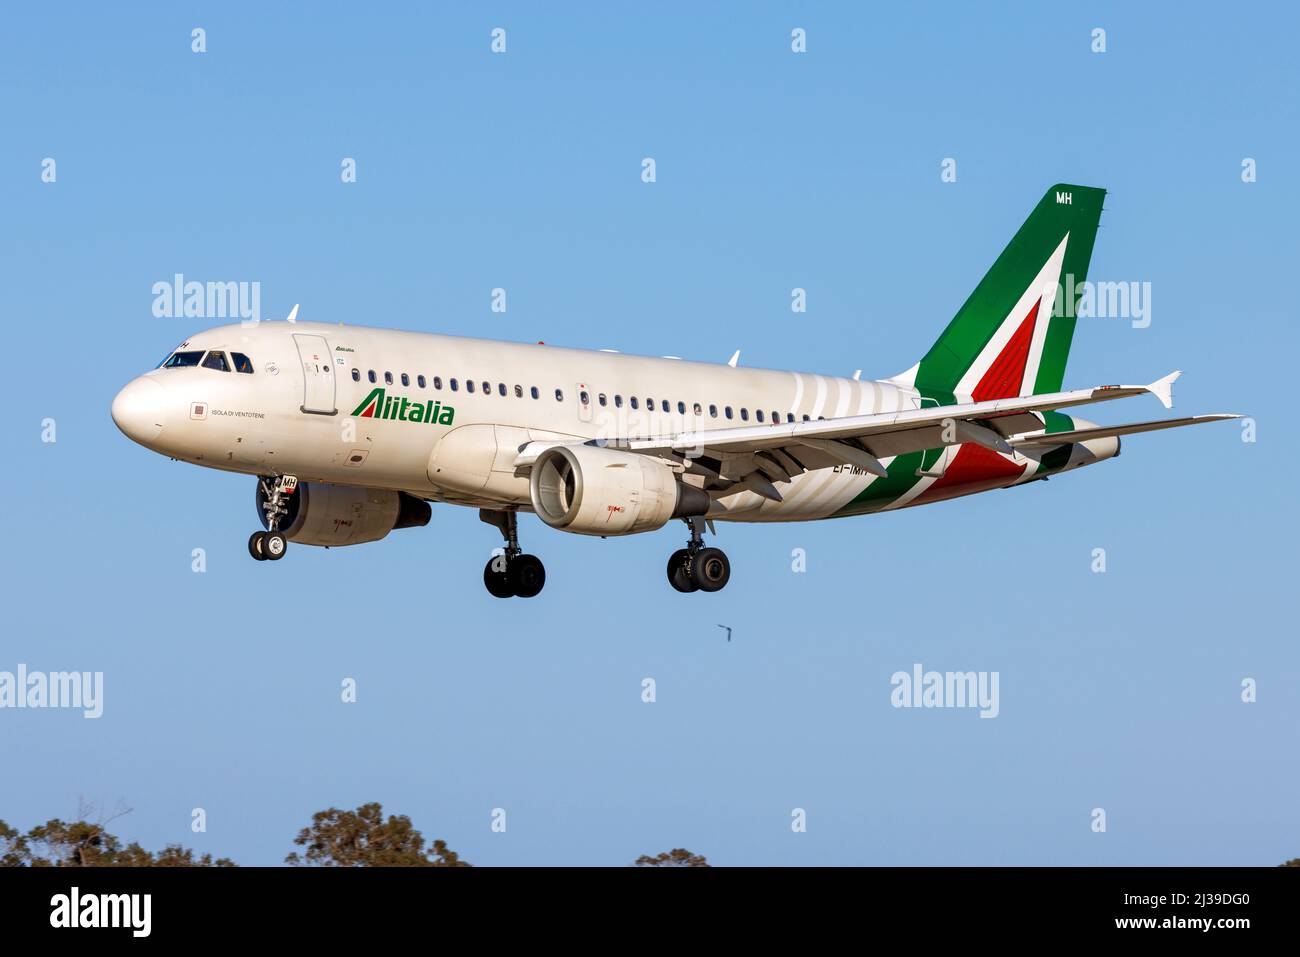 Alitalia Airbus A319-112 (REG: EI-IMH) performing first scheduled flight after being transferred to ITA Airways. Stock Photo